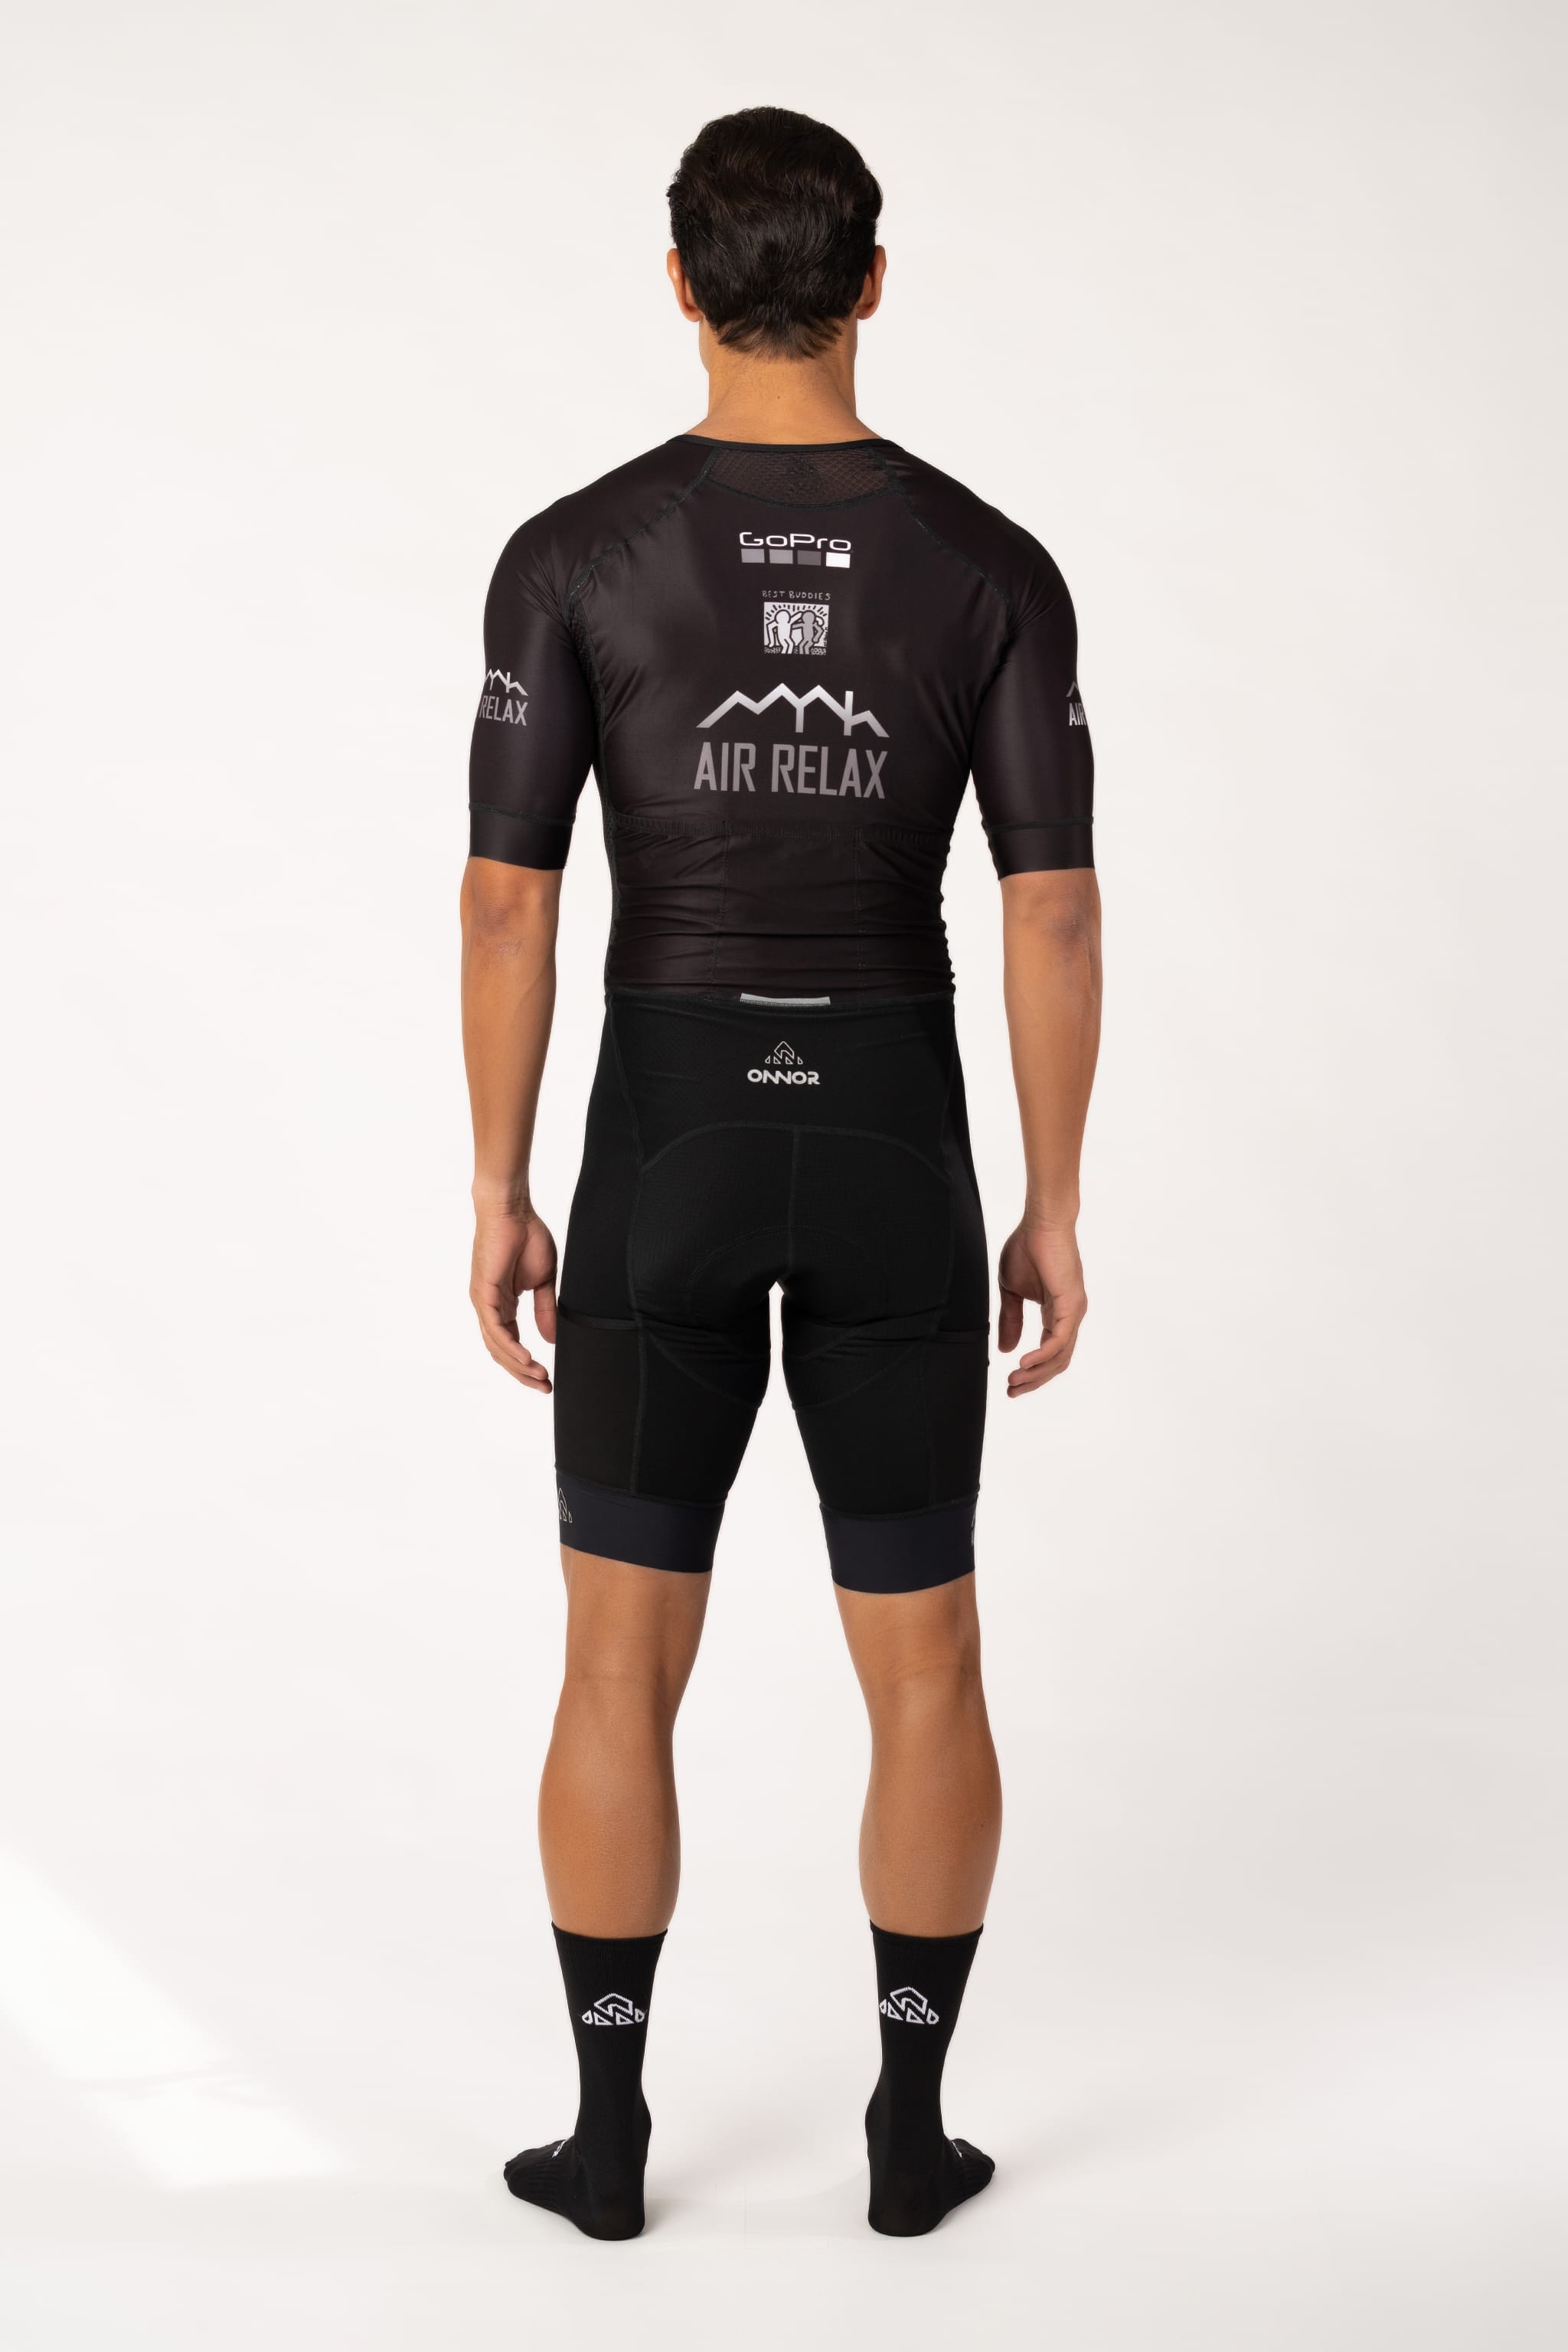 Top-Rated Custom Cycling Jerseys Miami